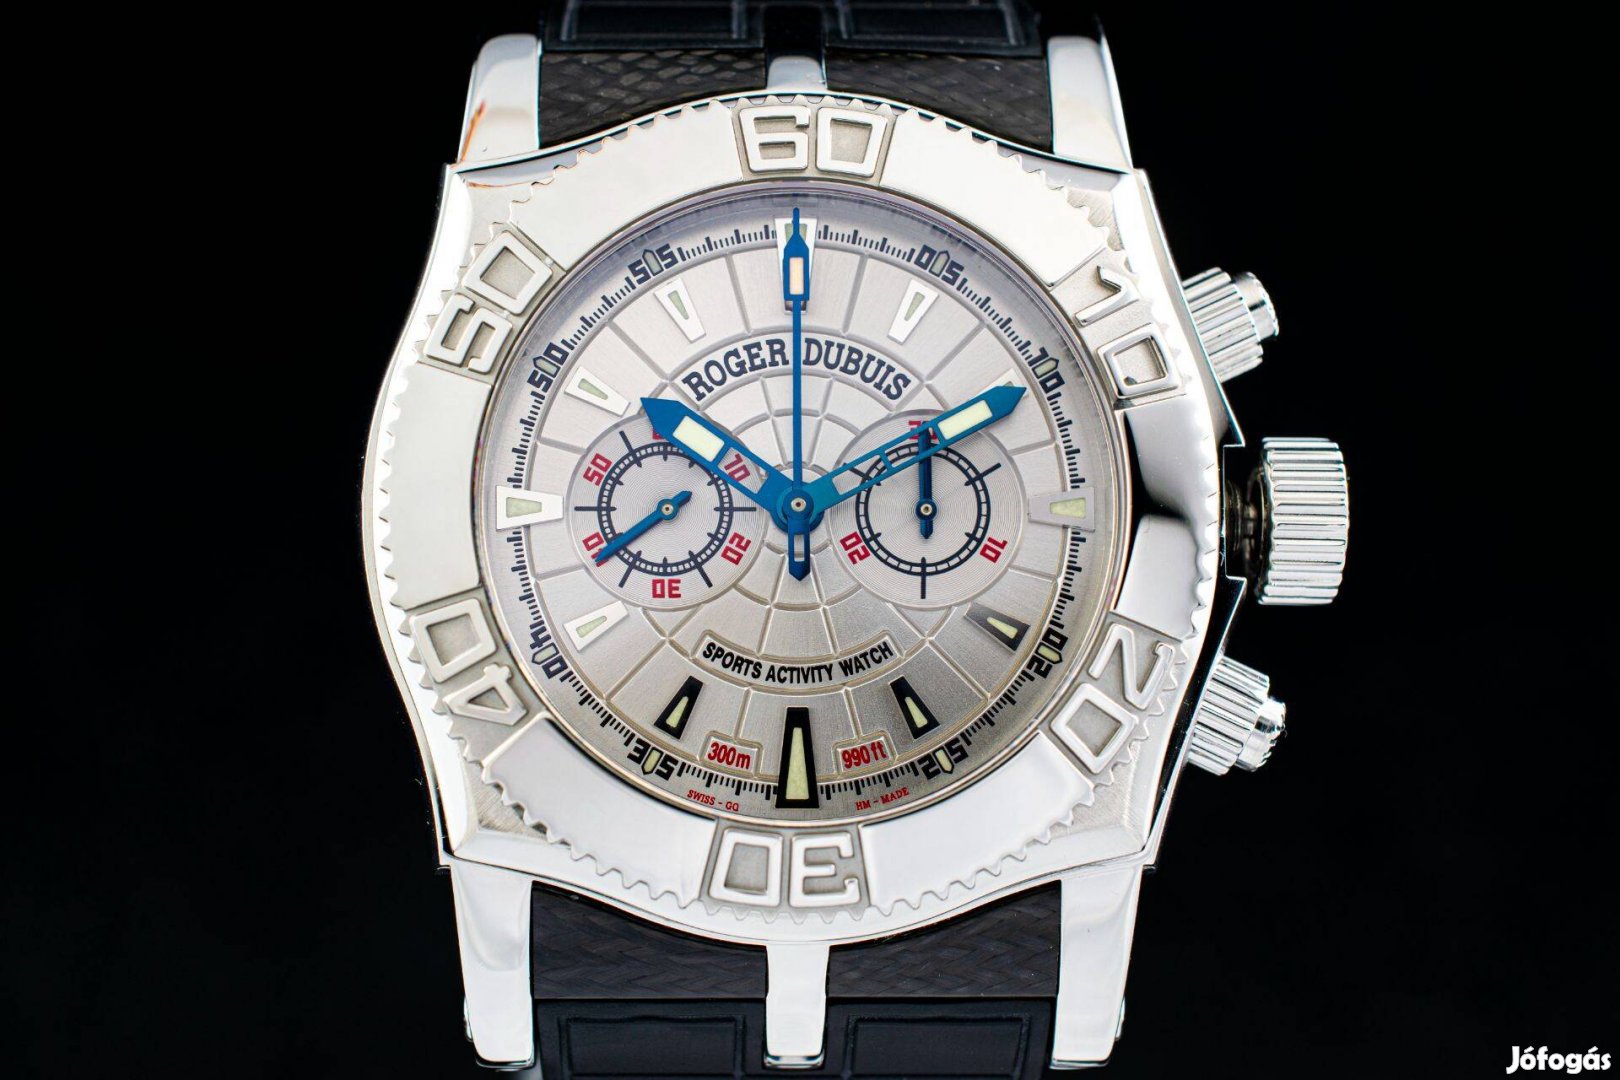 Roger Dubuis Easy Diver Chronograph Limited Edition